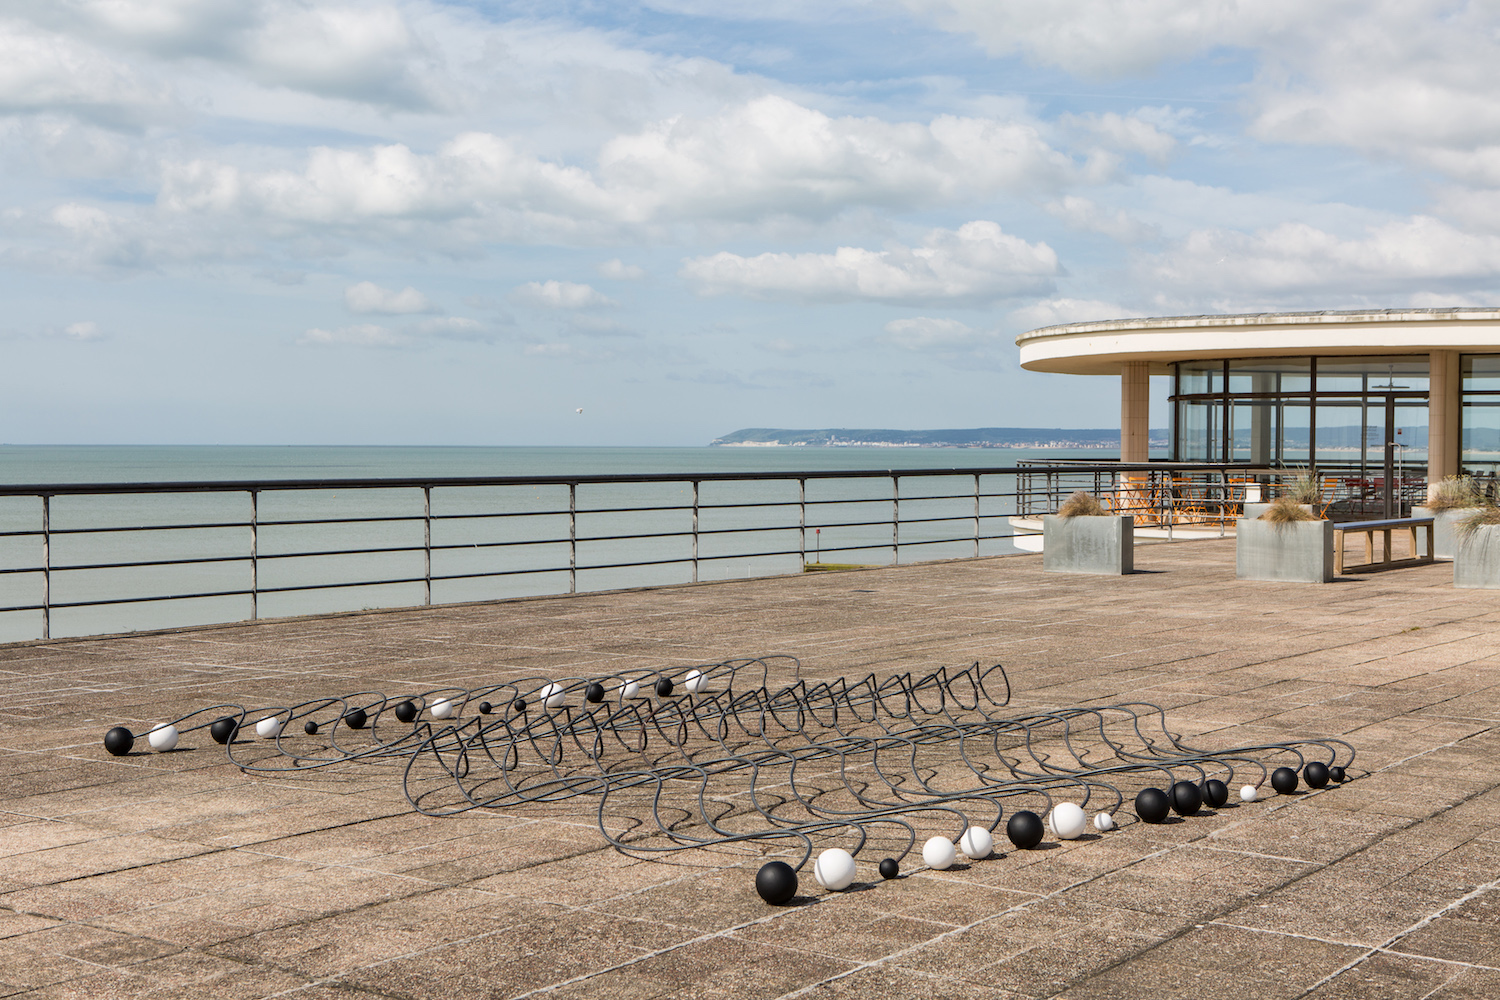 Installation view of 'Alison Wilding: Right Here and Out There' at the De La Warr Pavilion. Courtesy the artist and Karsten Schubert London. Photo © Rob Harris.